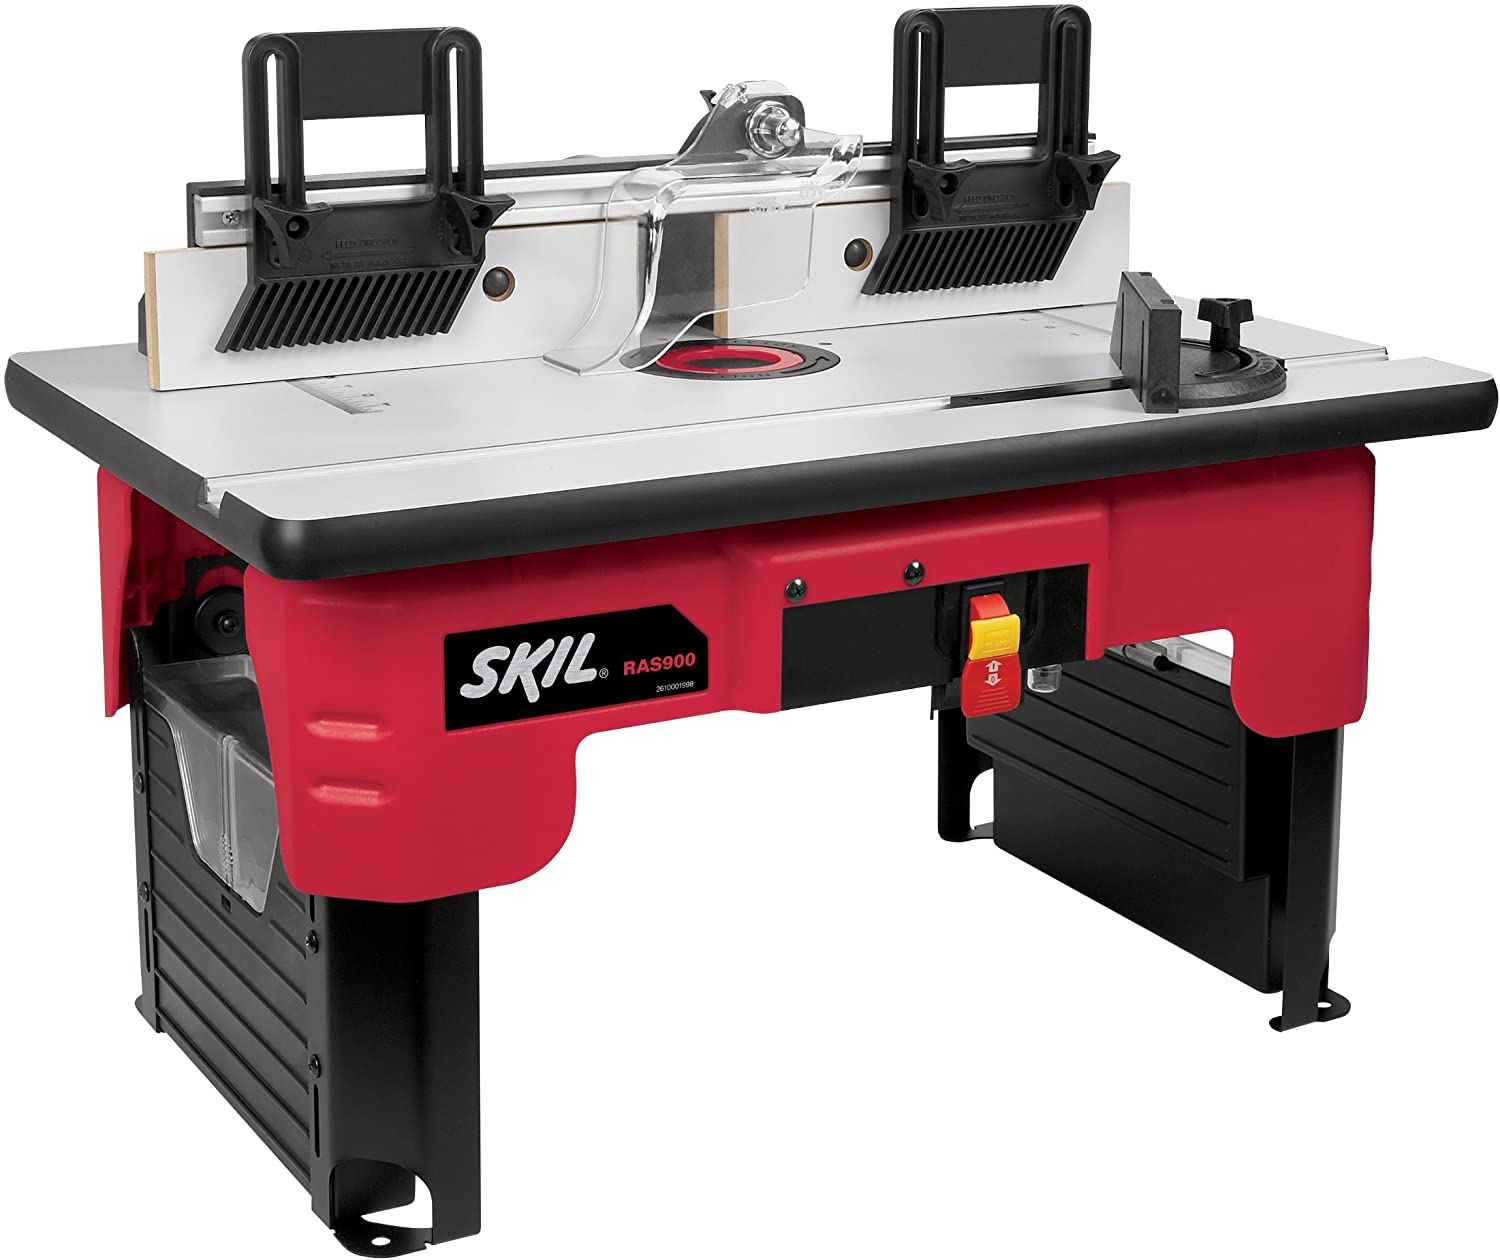 Skil RAS900 Universal Router Table